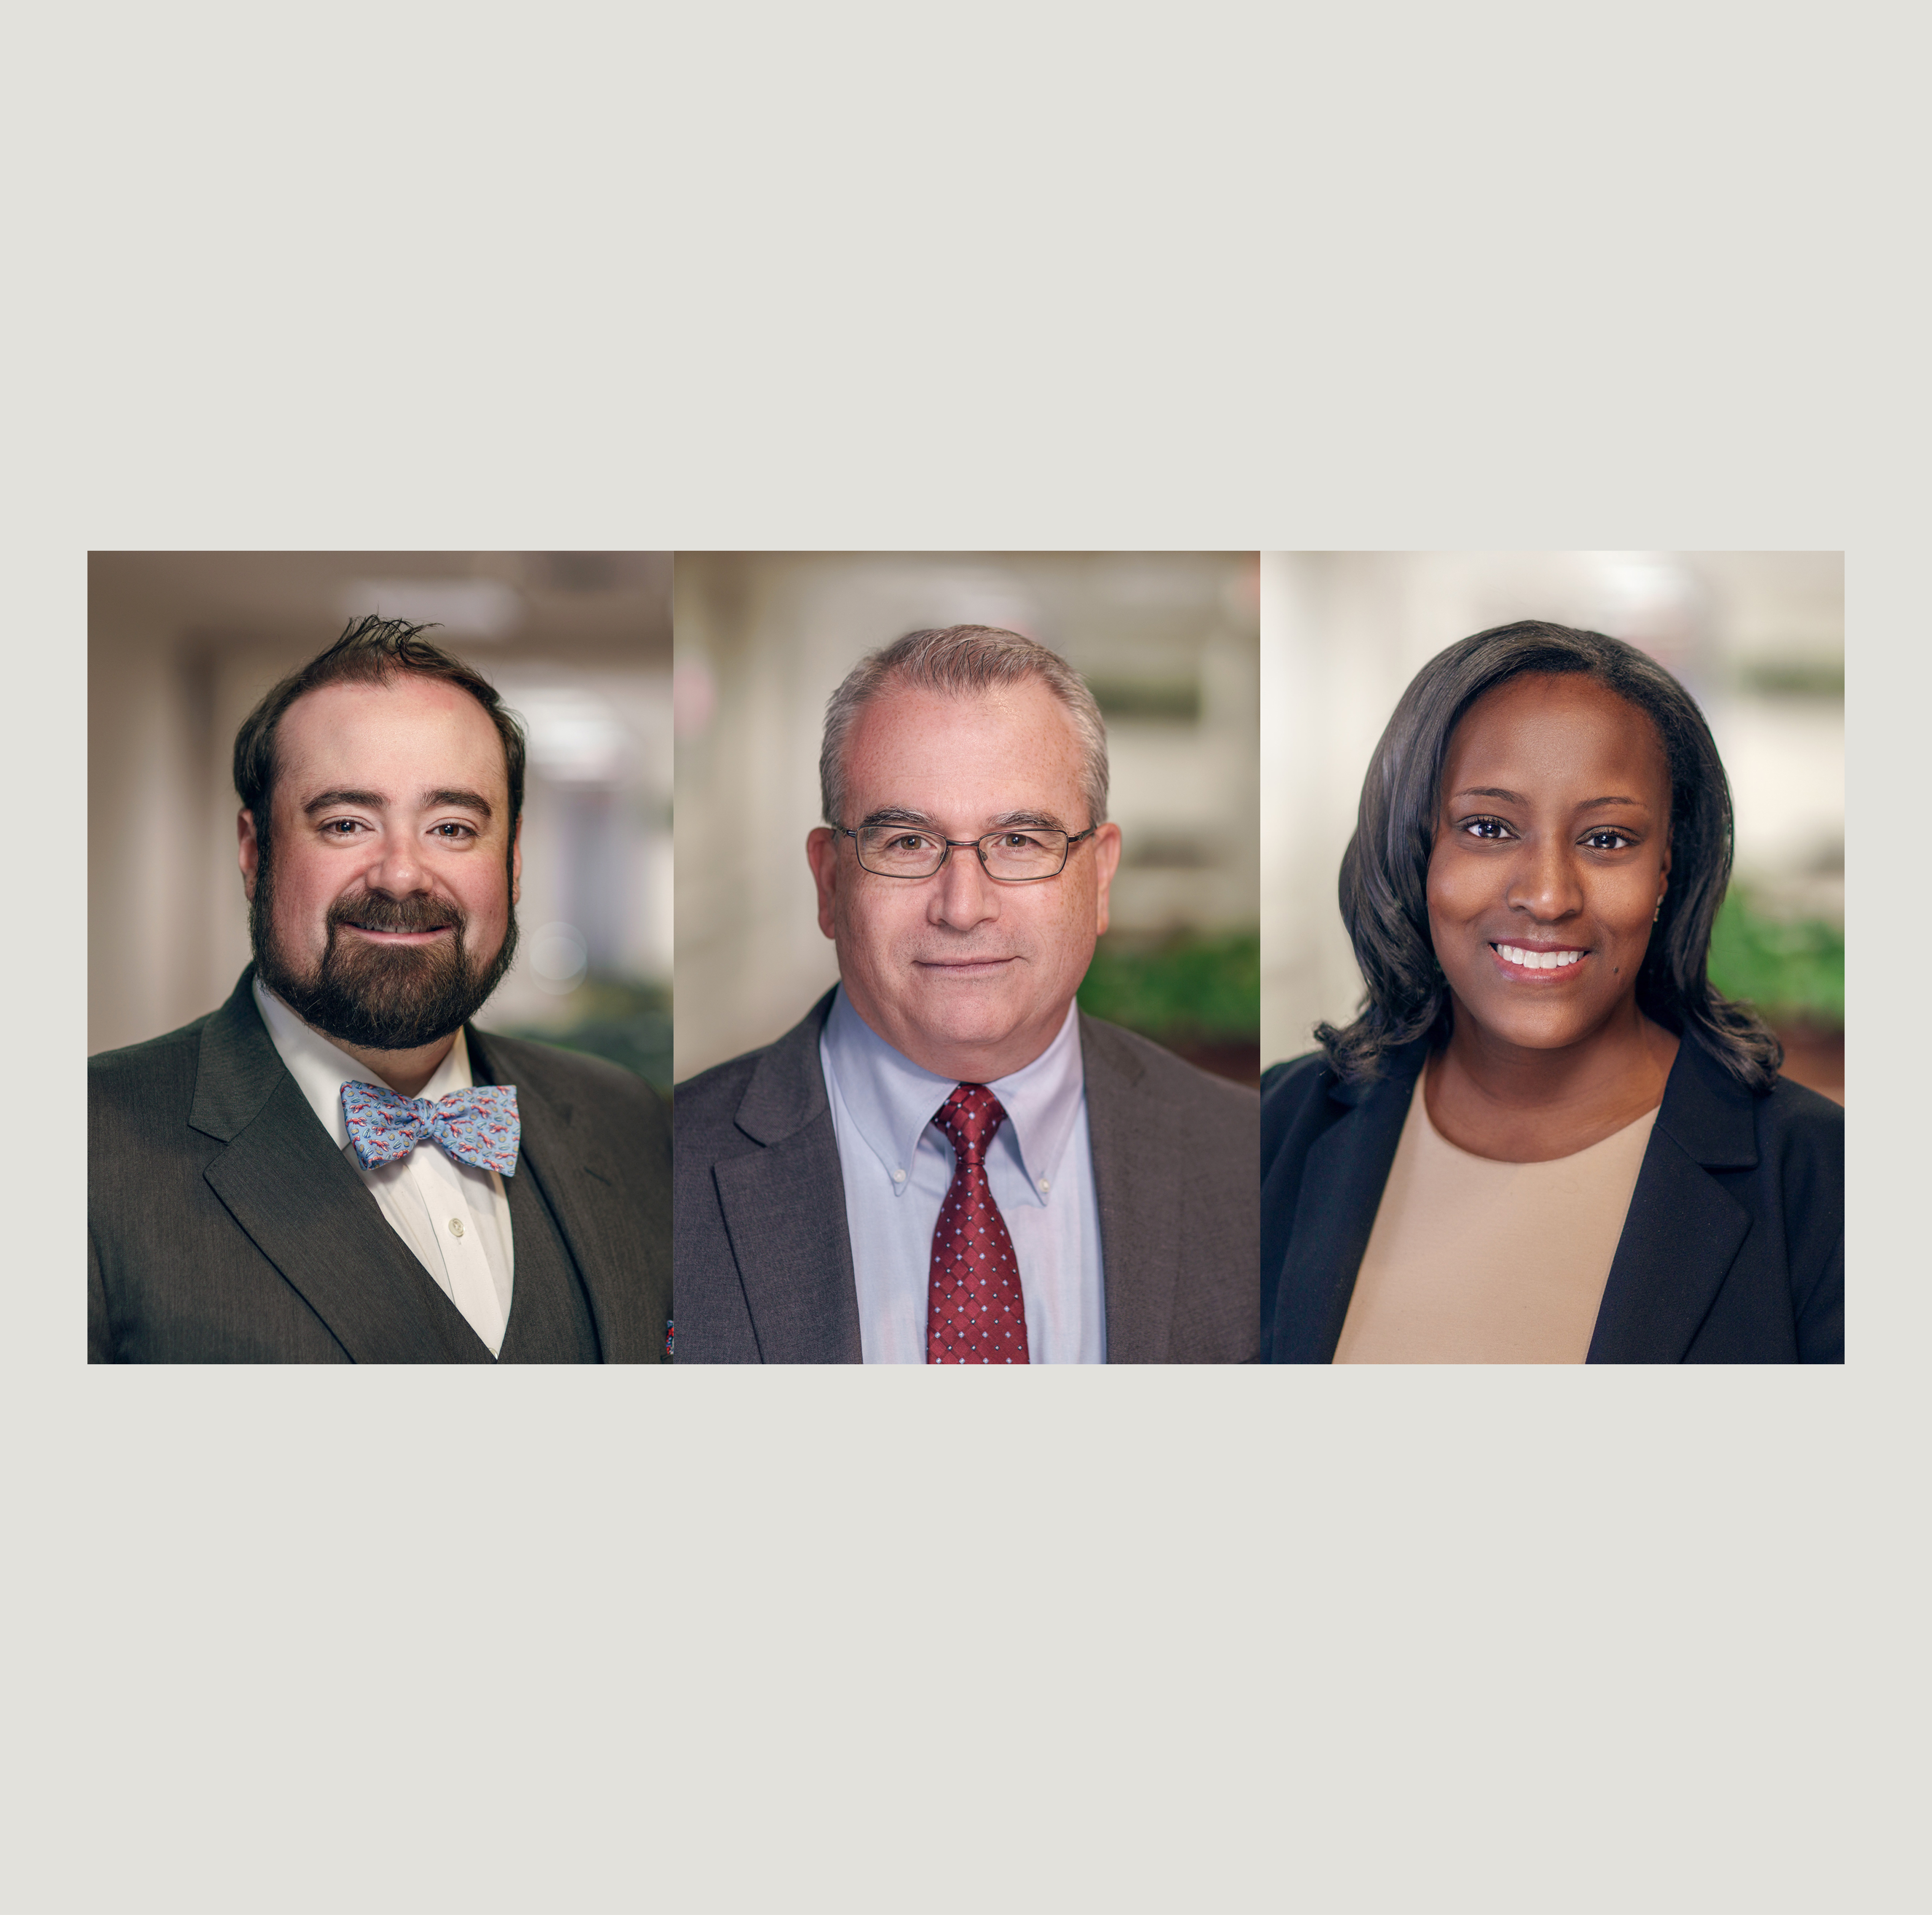 Connecticut Movers: Recent Hires at Nutmeg State Firms